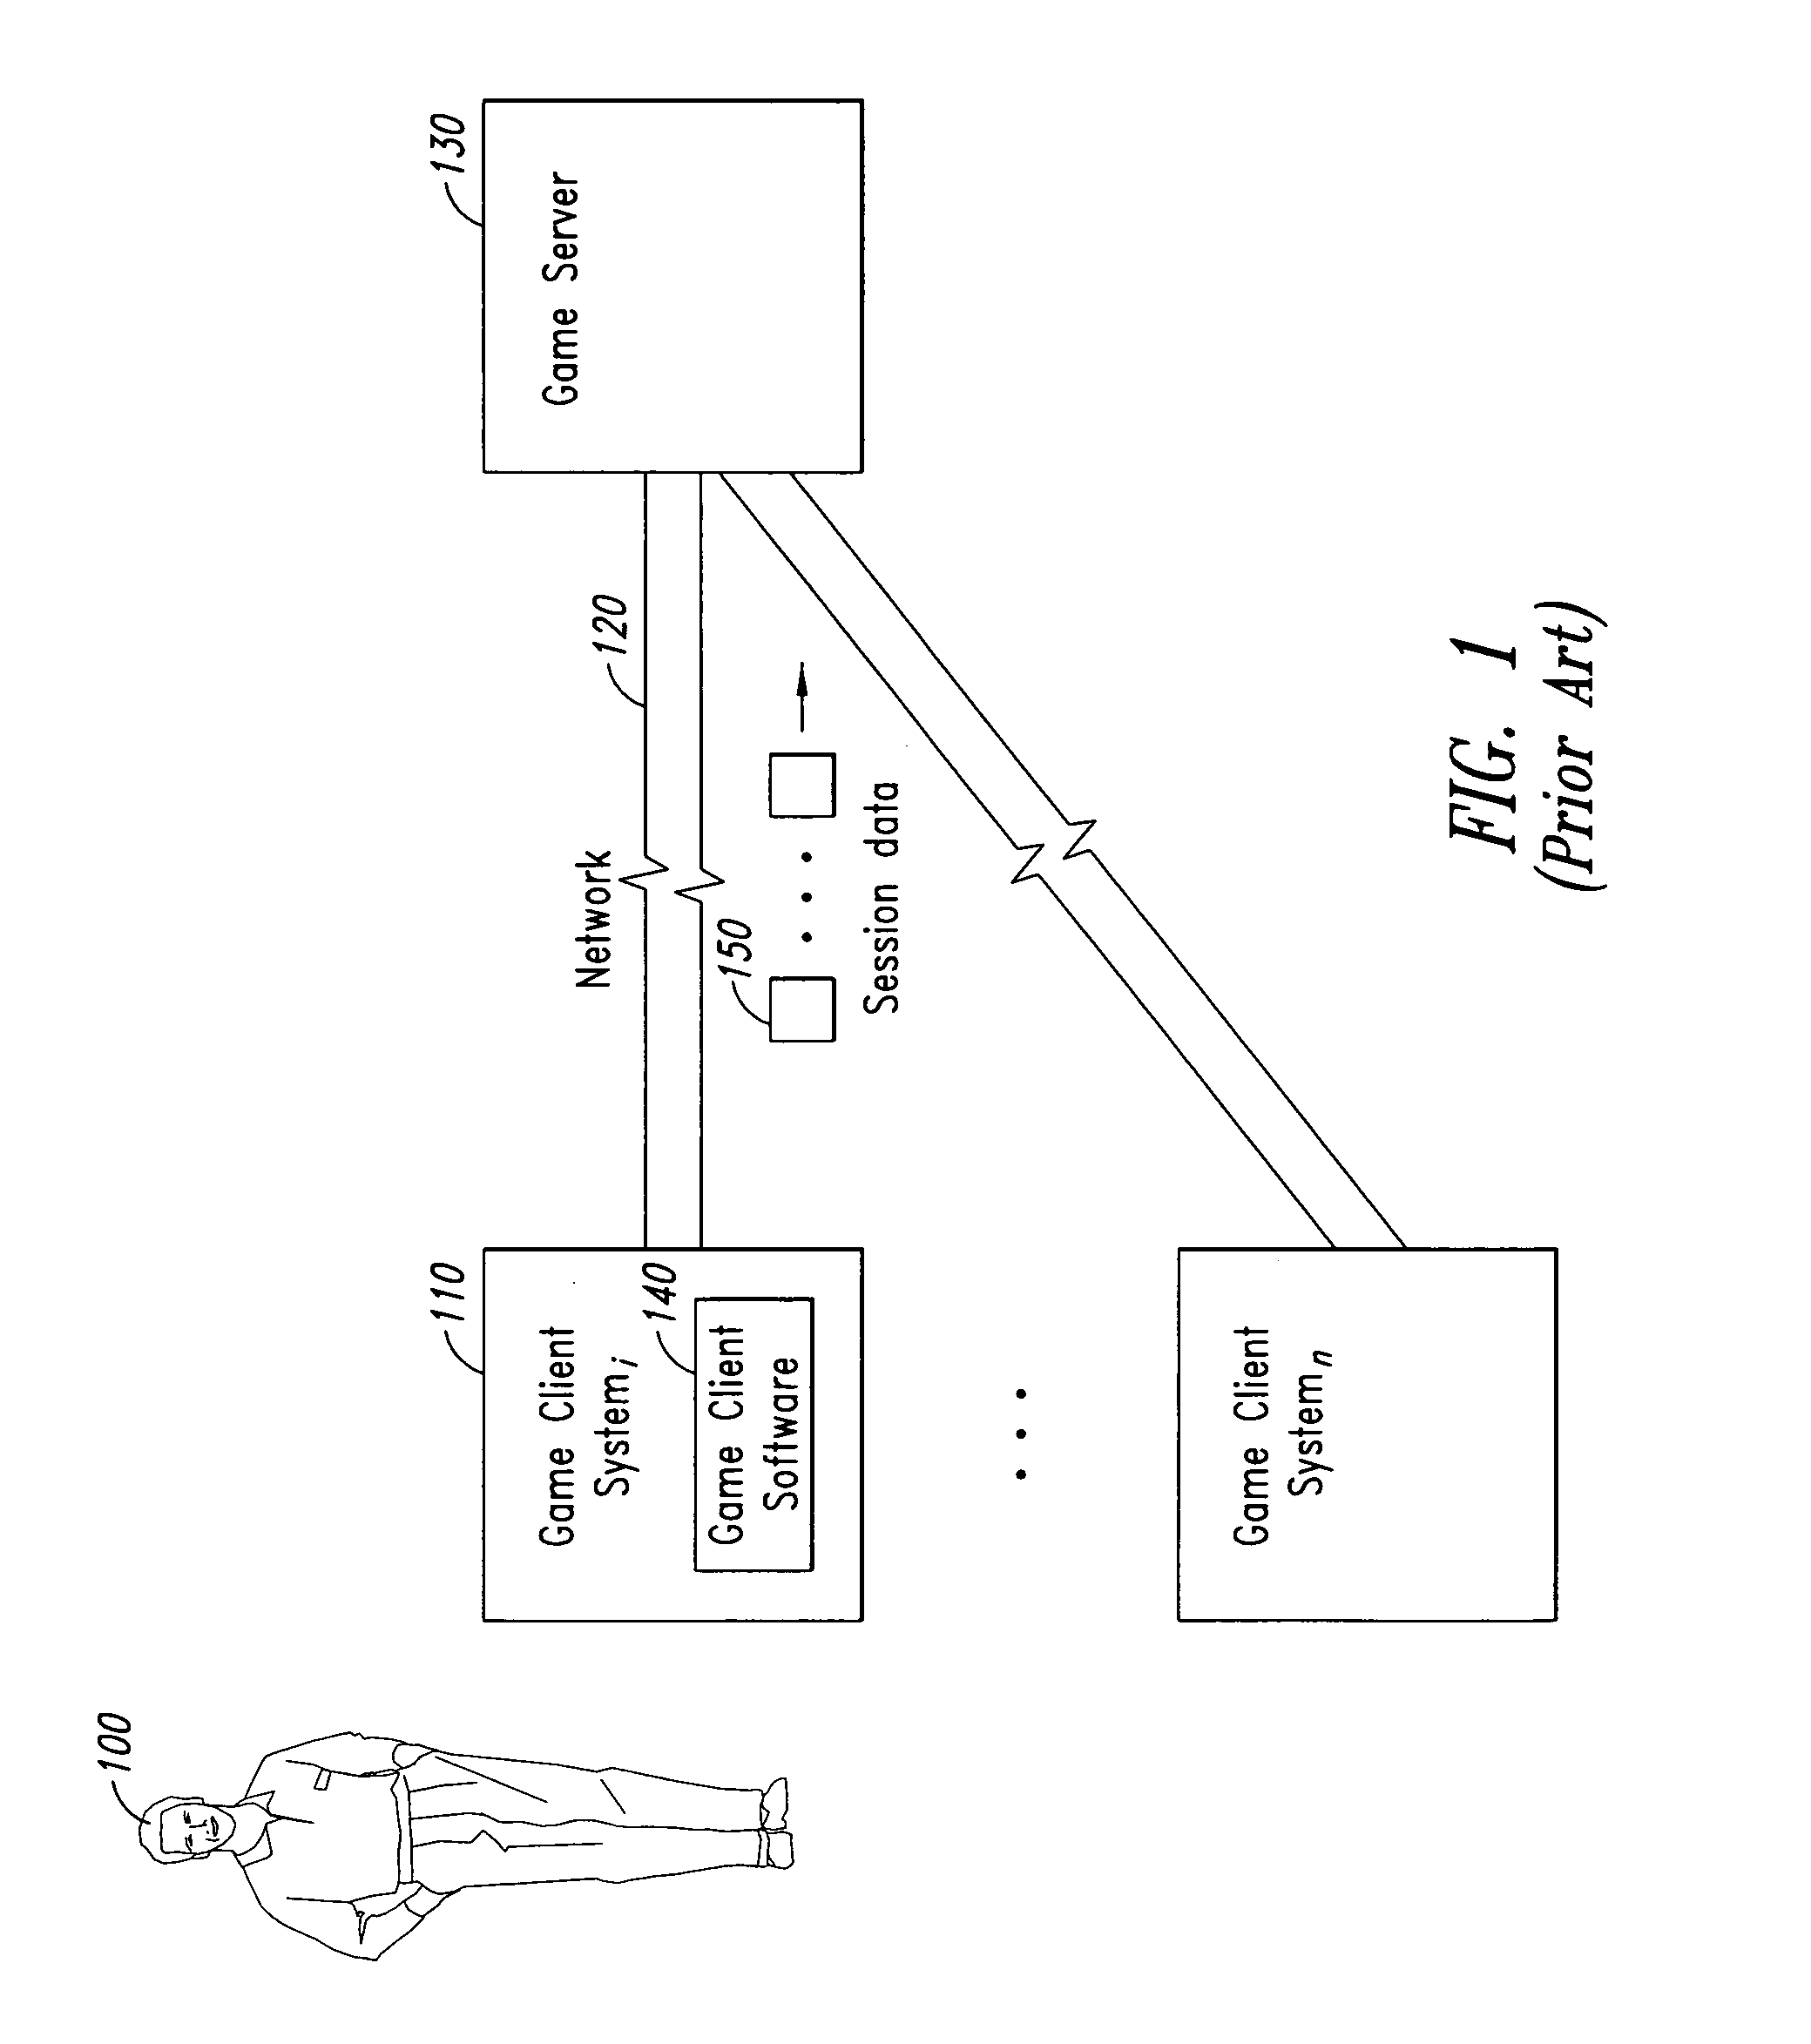 Method and system for secure distribution of subscription-based game software